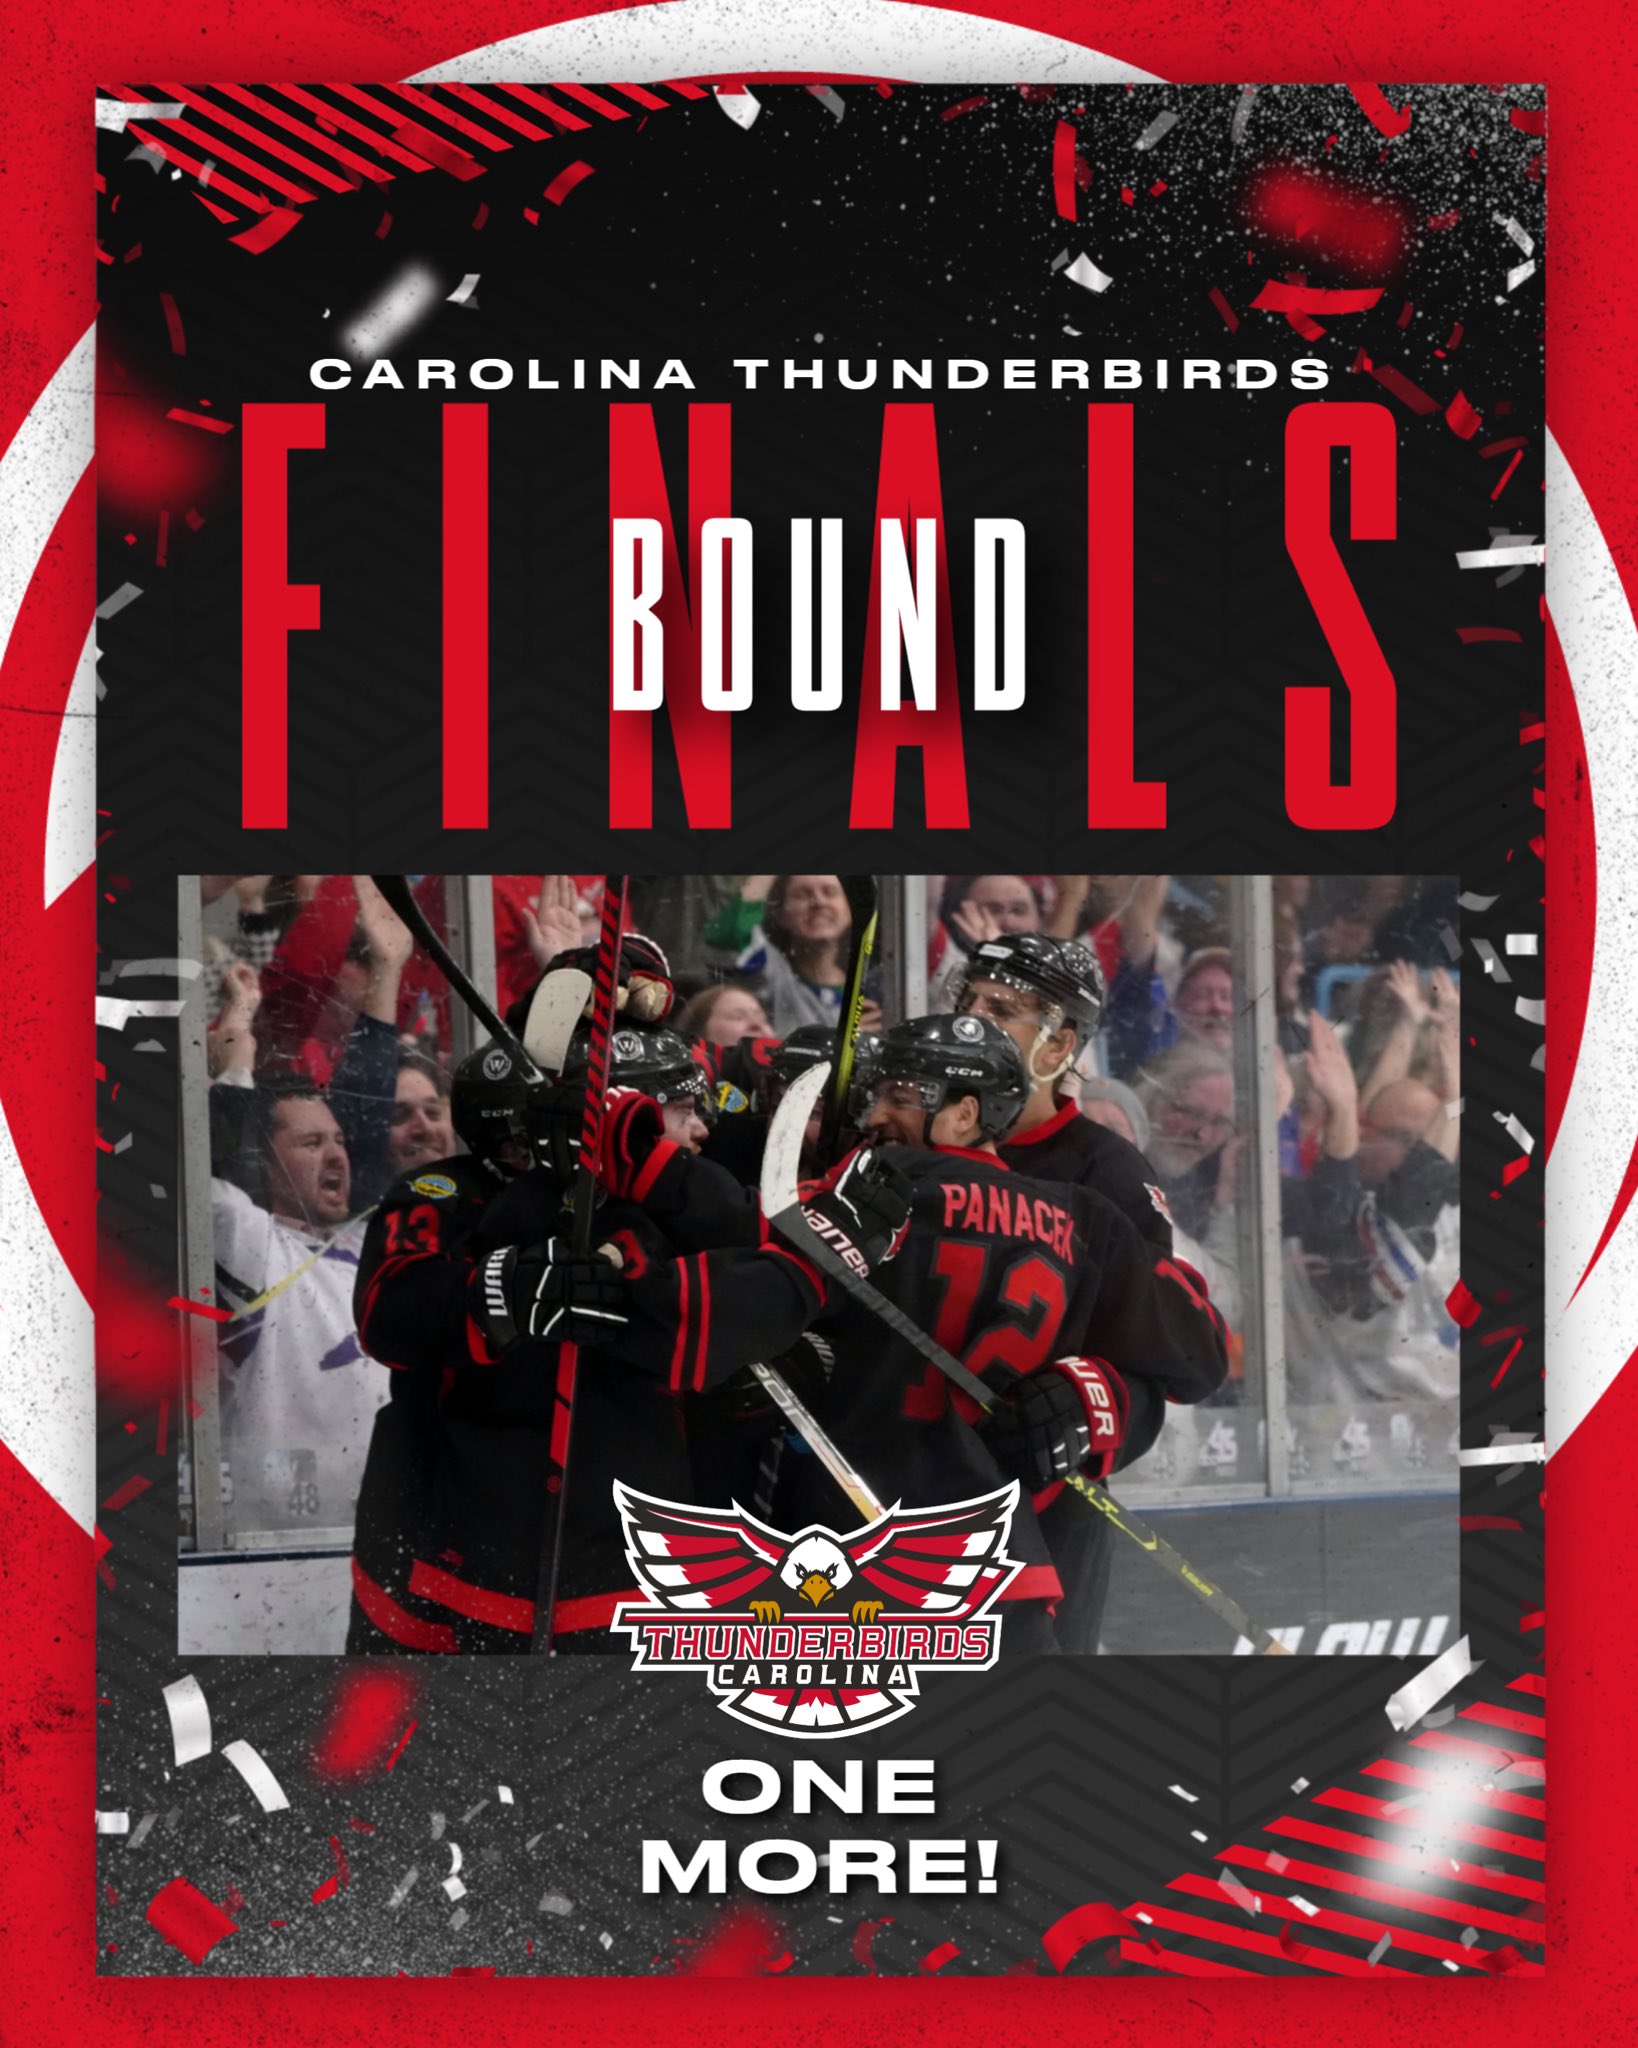 Carolina Thunderbirds on X: And right before playoffs, we all